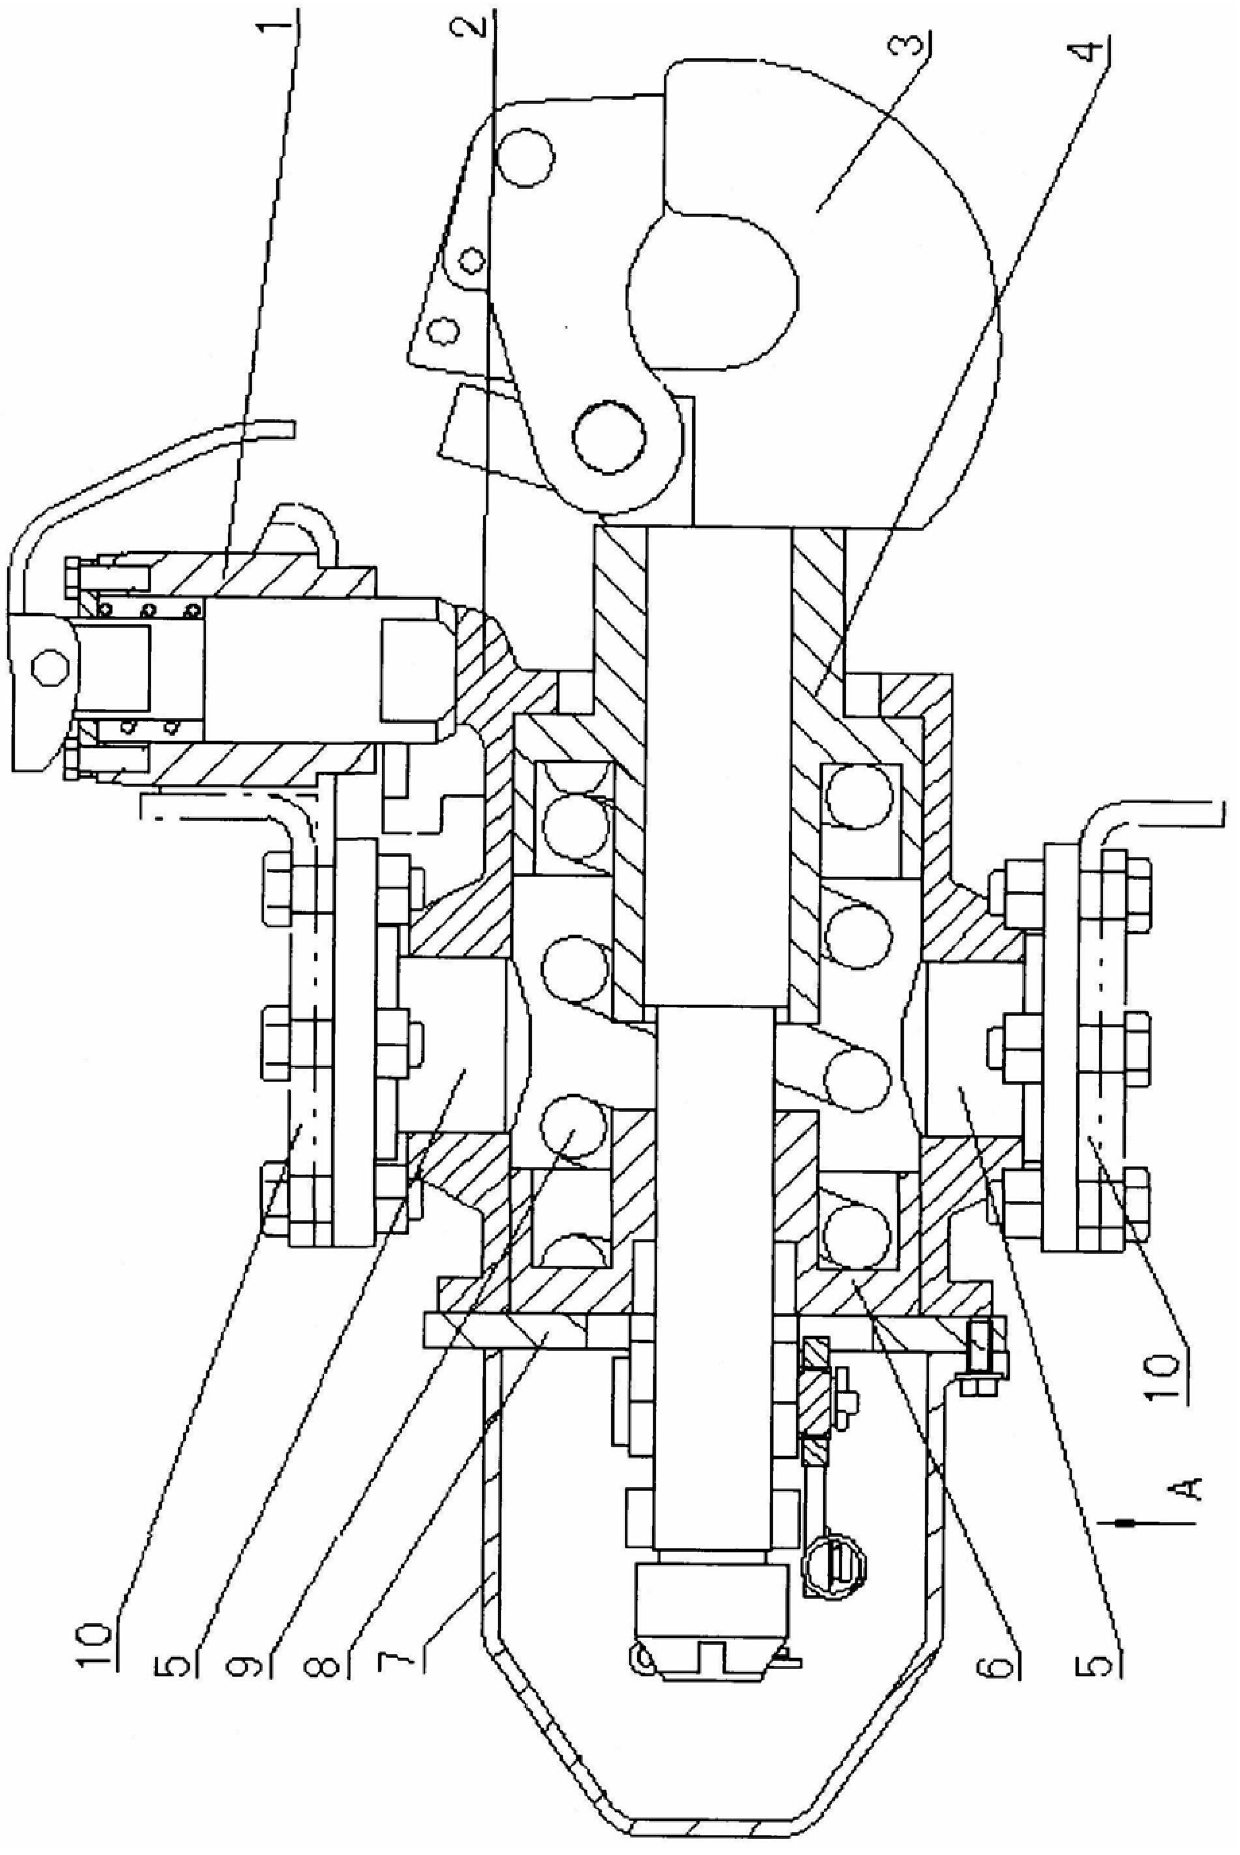 Multi-degree-of-freedom traction device